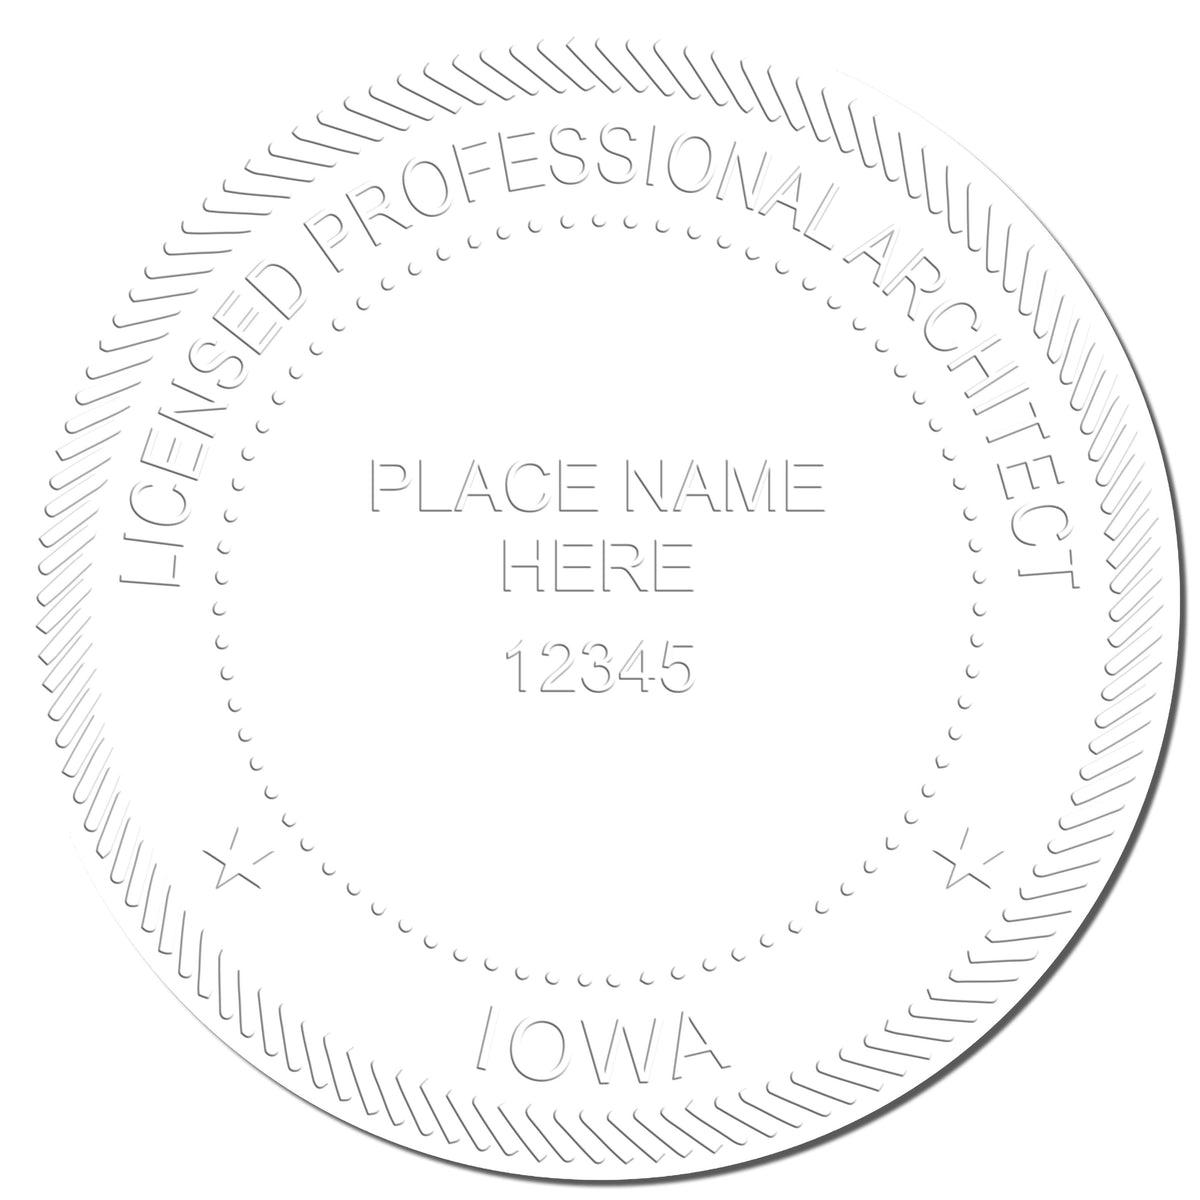 This paper is stamped with a sample imprint of the State of Iowa Architectural Seal Embosser, signifying its quality and reliability.